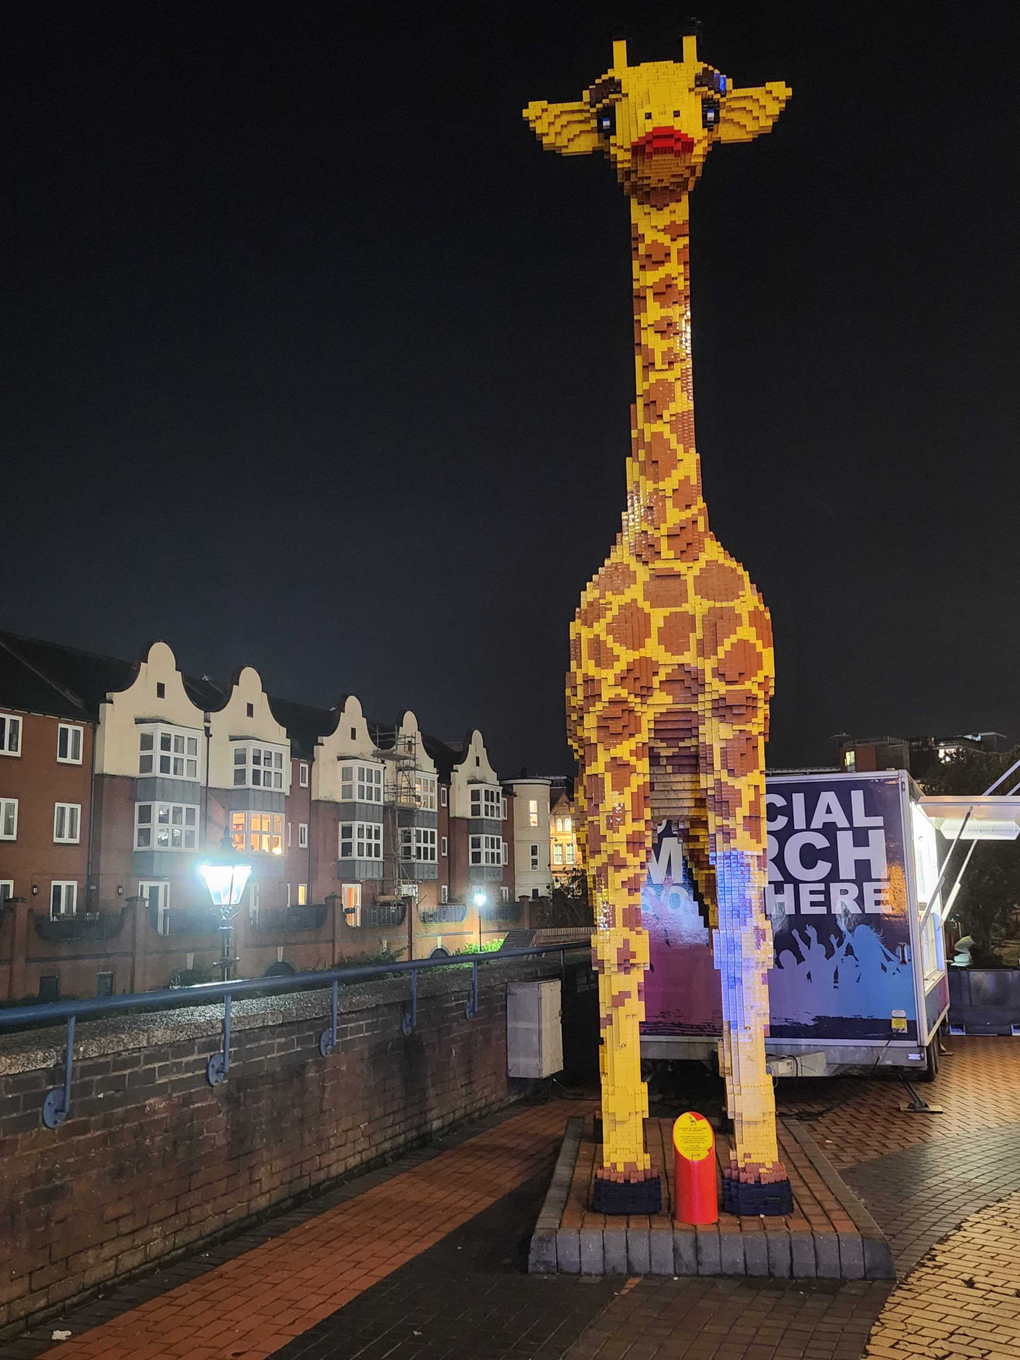 A life size giraffe made out of lego stands out against the night sky